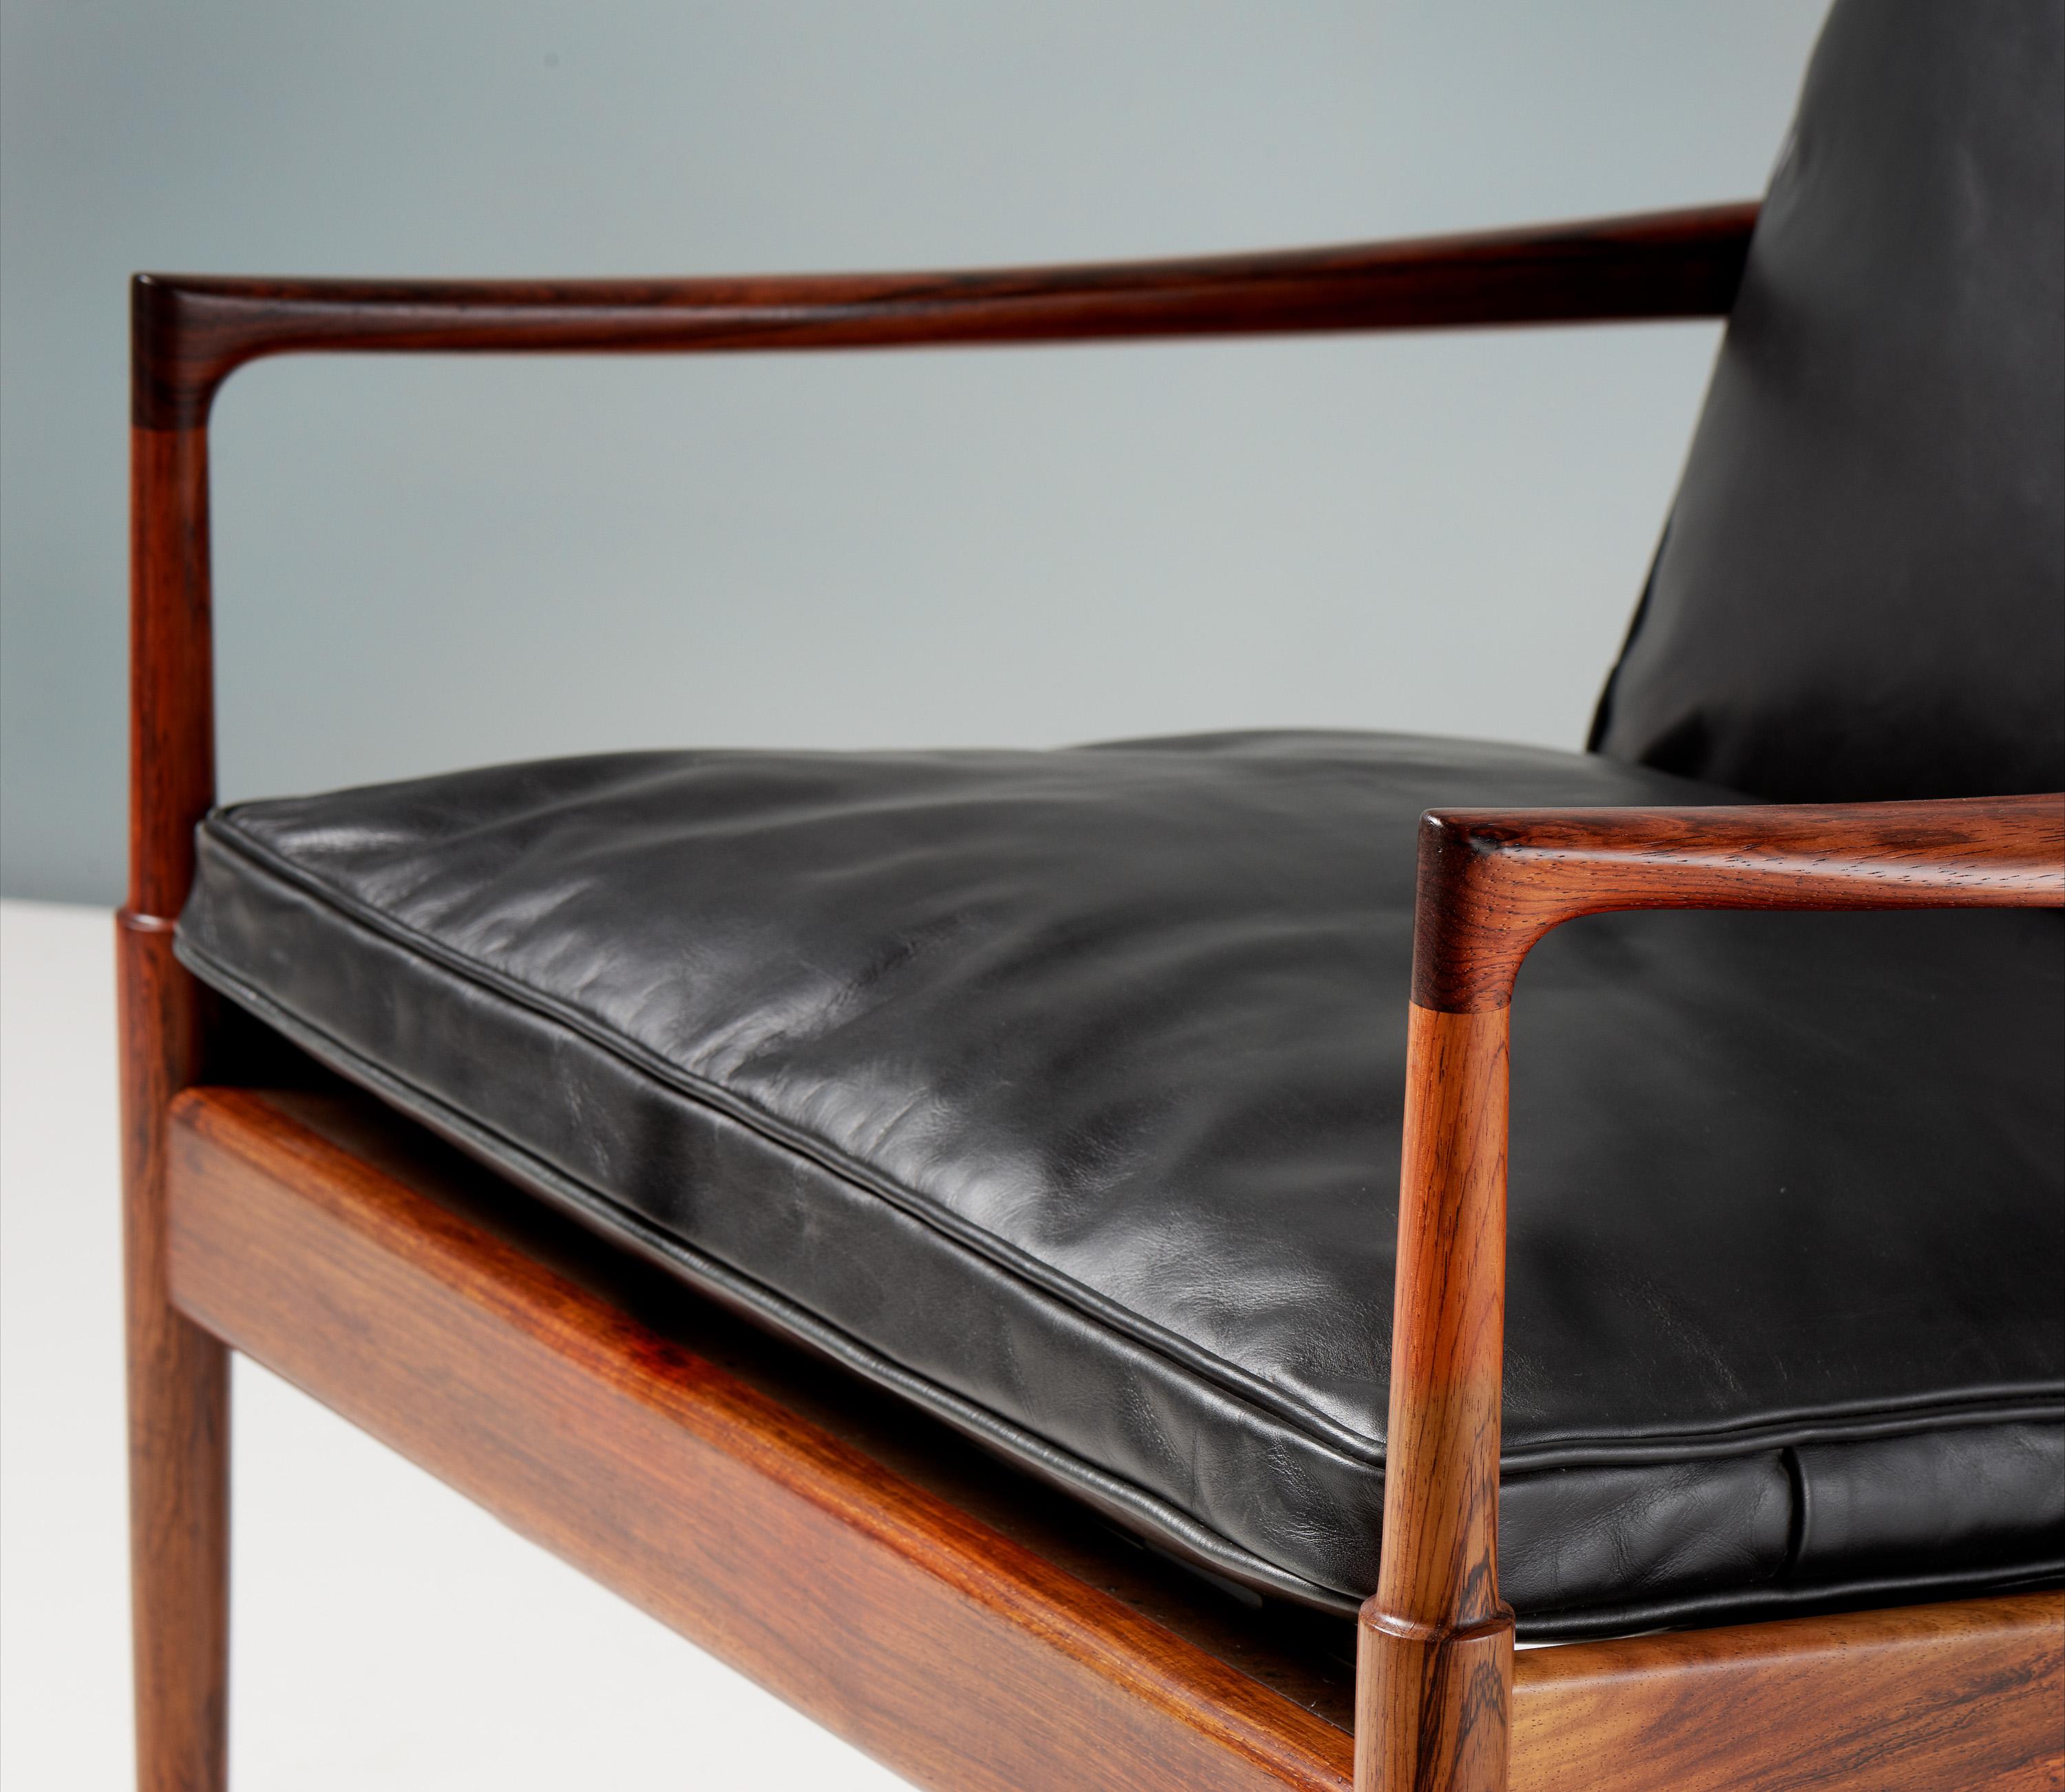 Ib Kofod-Larsen Rosewood & Leather Samso Chair, 1958 In Excellent Condition For Sale In London, GB